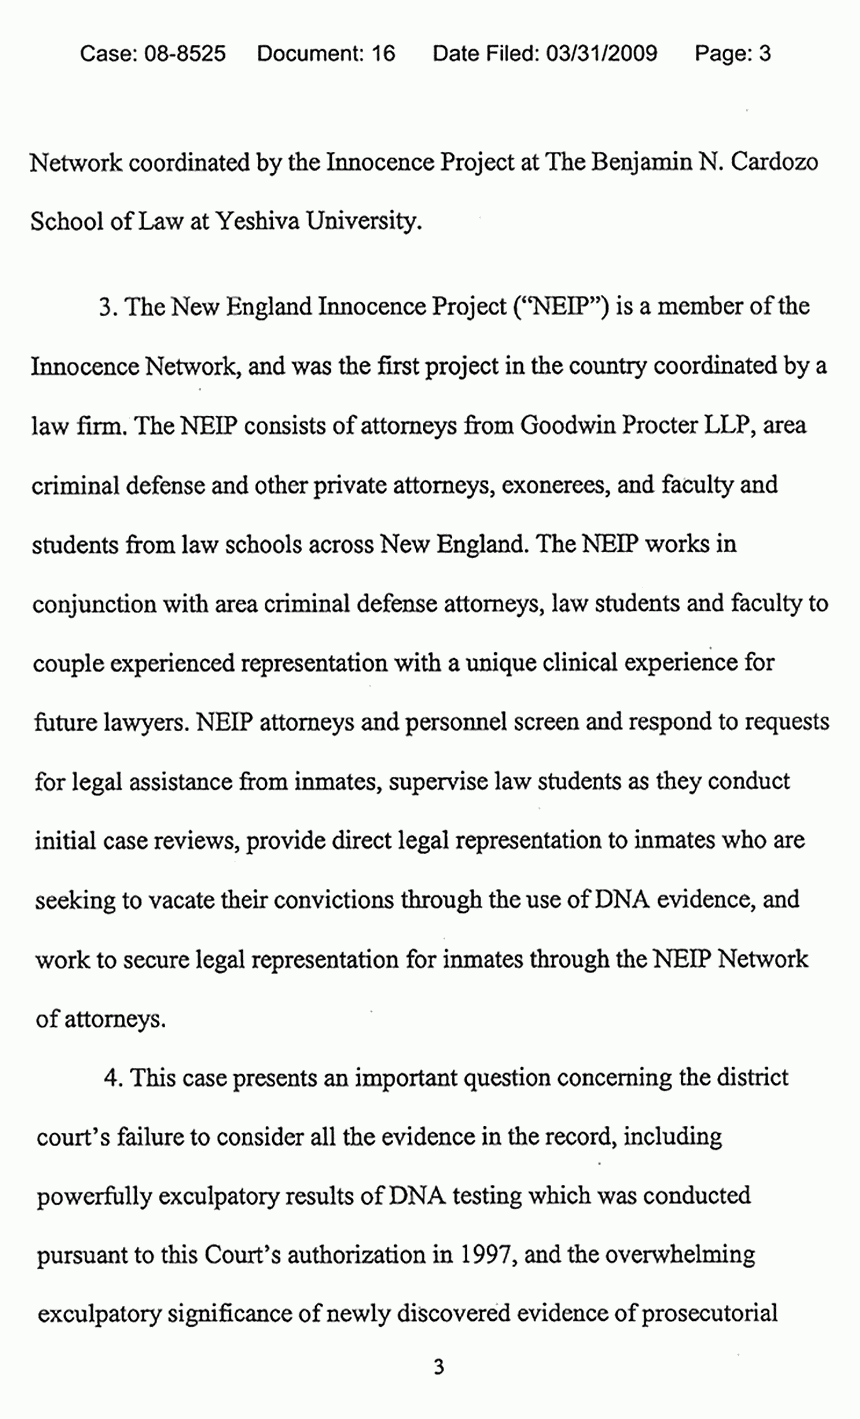 March 31, 2009: U. S. Court of Appeals for the Fourth Circuit: Motion of the Innocence Project, the North Carolina Center of Actual Innocence, and the New England Innocence Project for Leave to File Brief as Amicus Curiae, p. 3 of 5